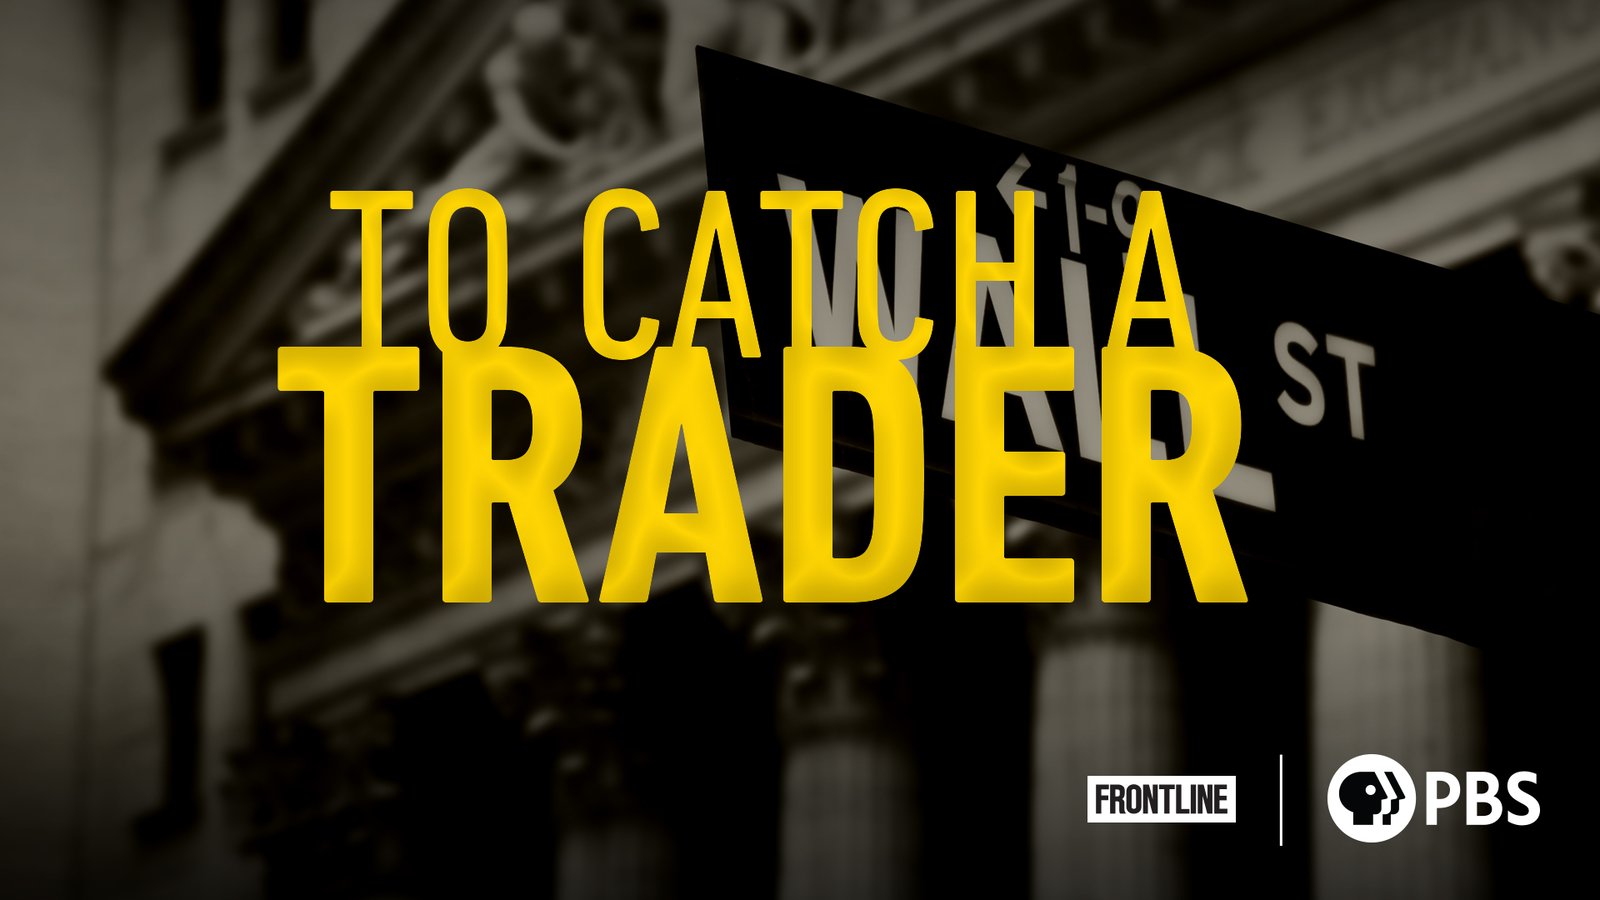 To Catch a Trader